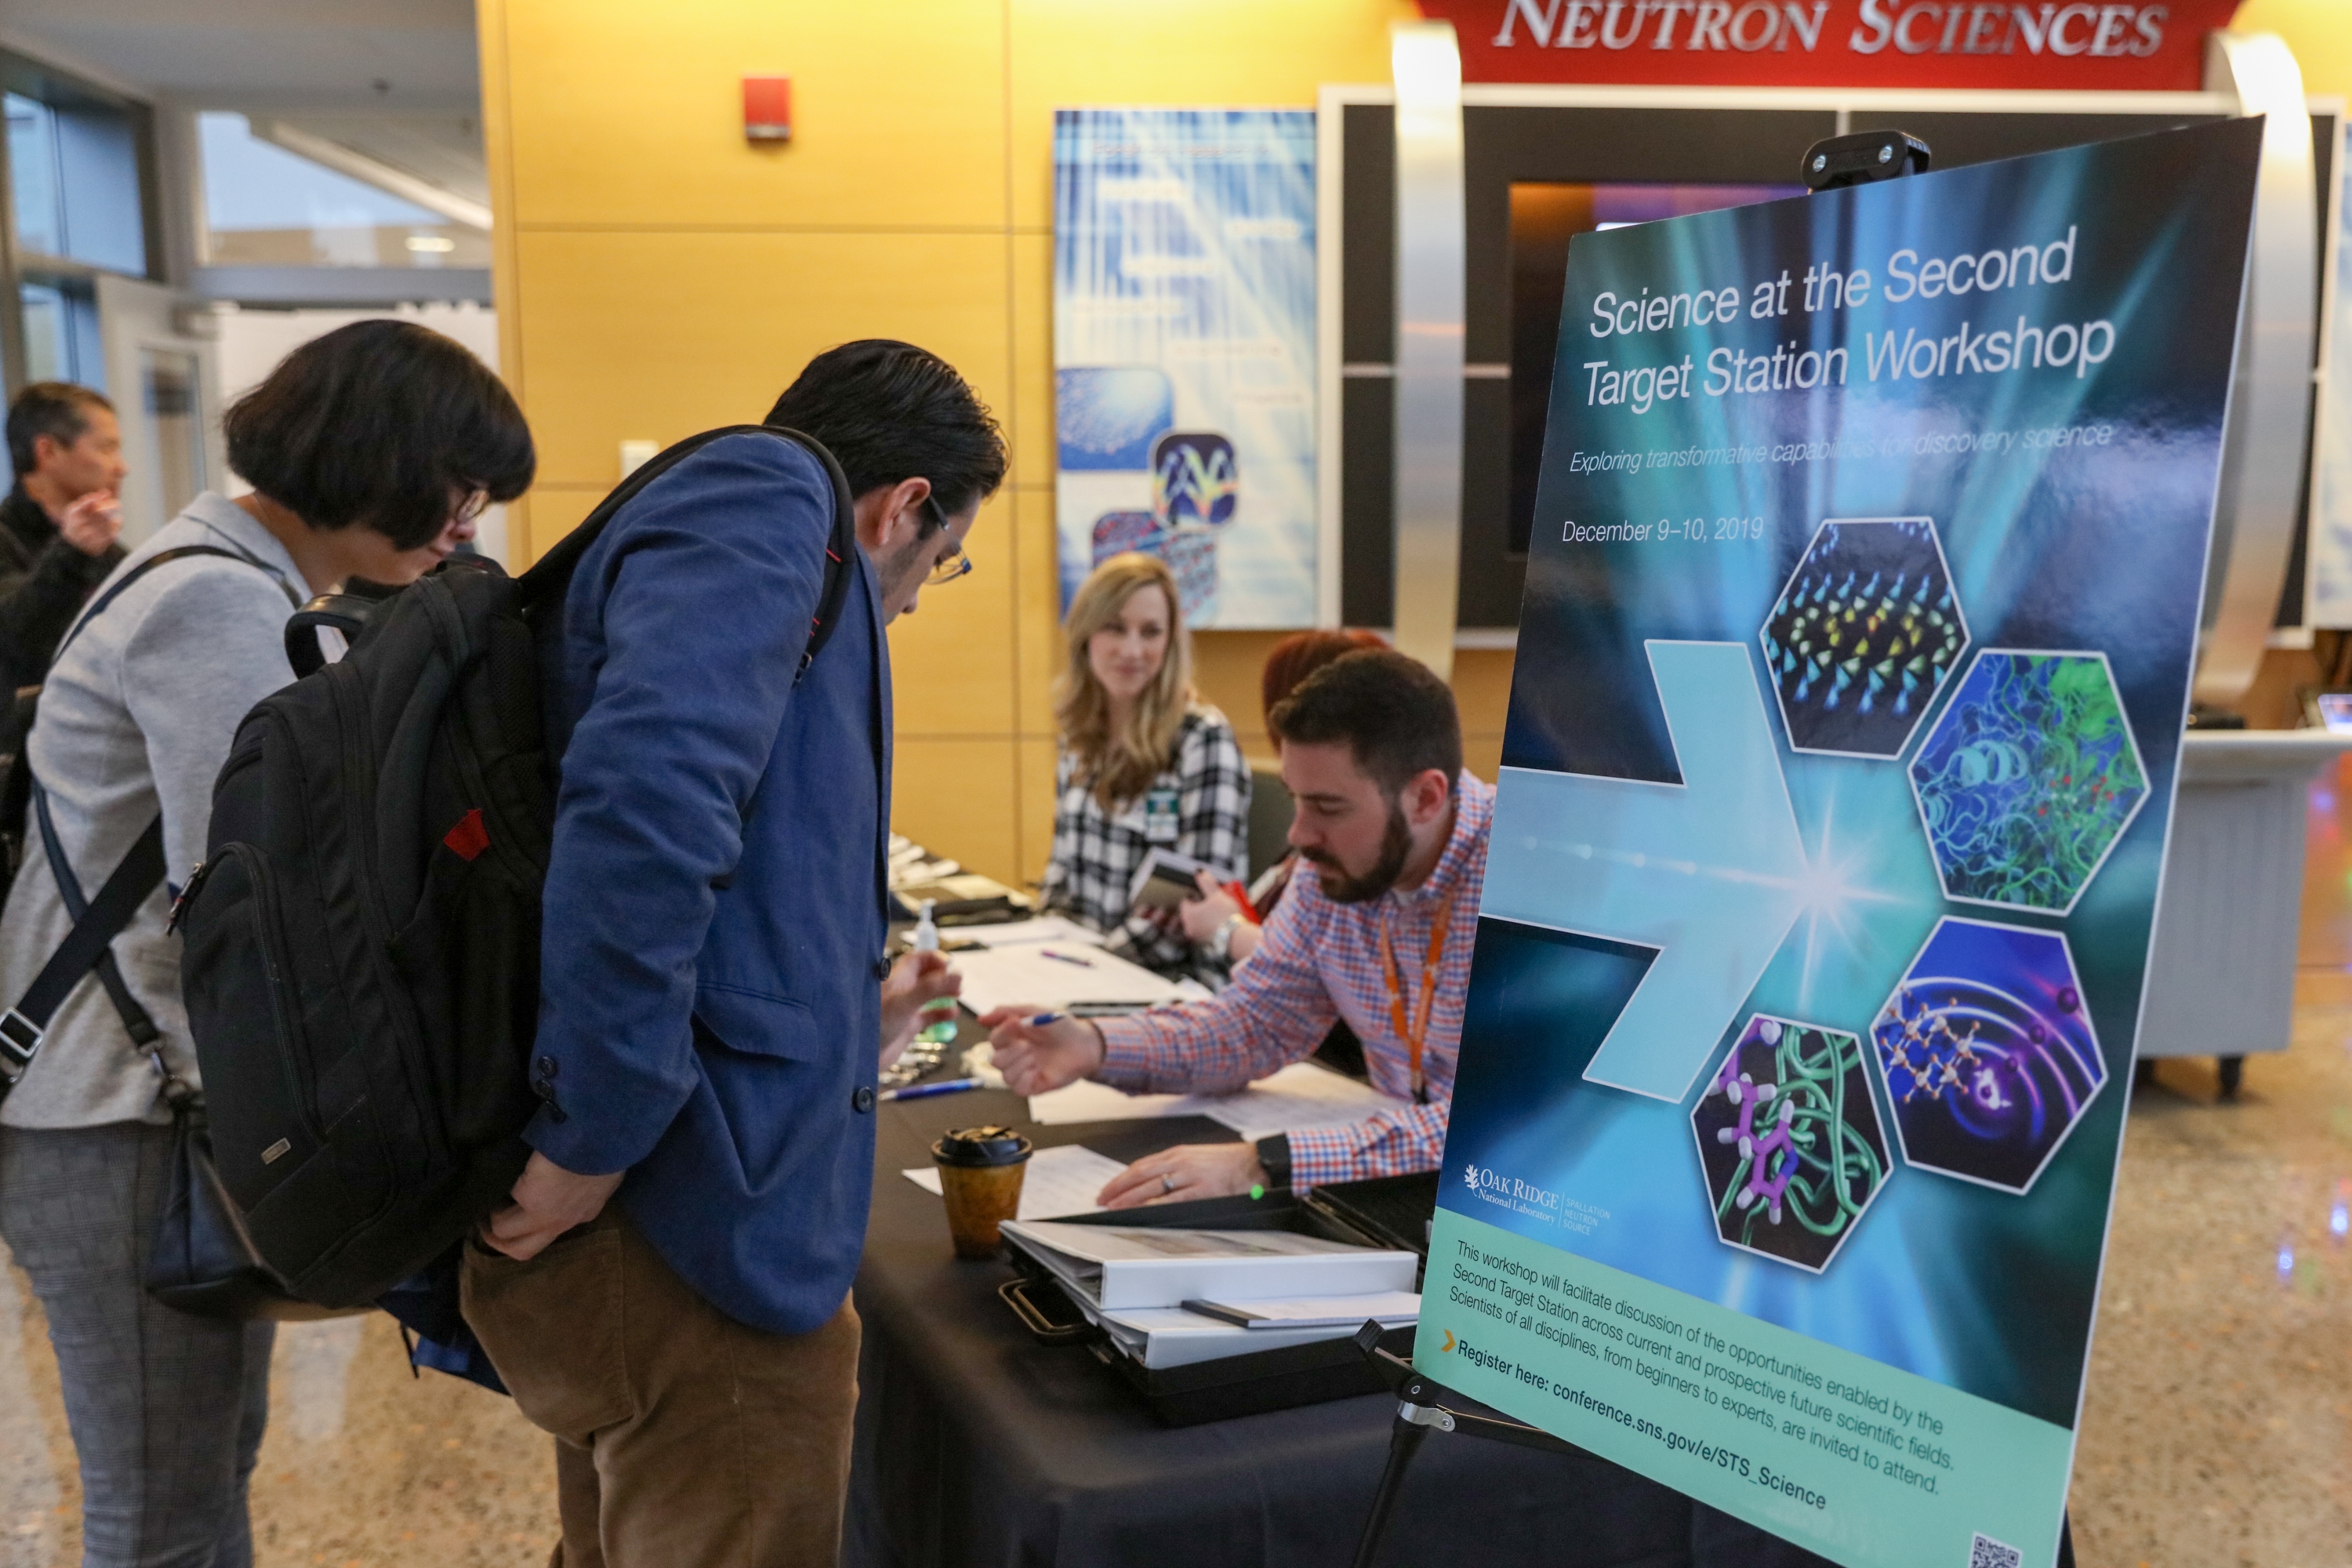 Nearly 300 members of the global neutron scattering community attended the Science at the ‘Second Target Station’ workshop, either onsite or remotely. Credit: ORNL/Genevieve Martin 